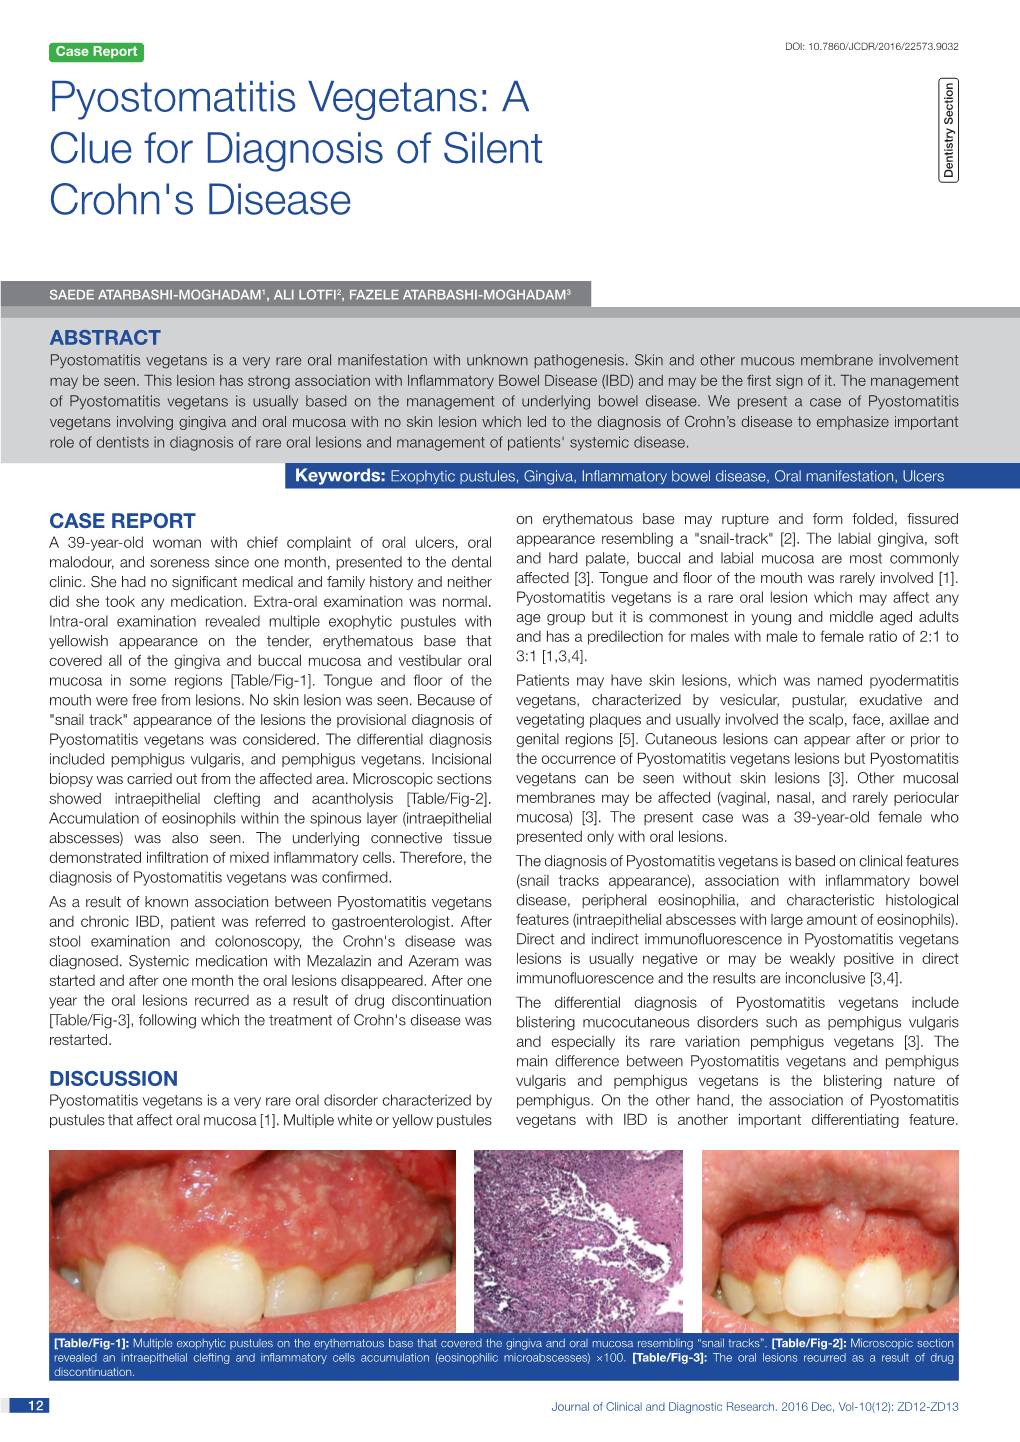 Pyostomatitis Vegetans: a Clue for Diagnosis of Silent Dentistry Section Crohn's Disease